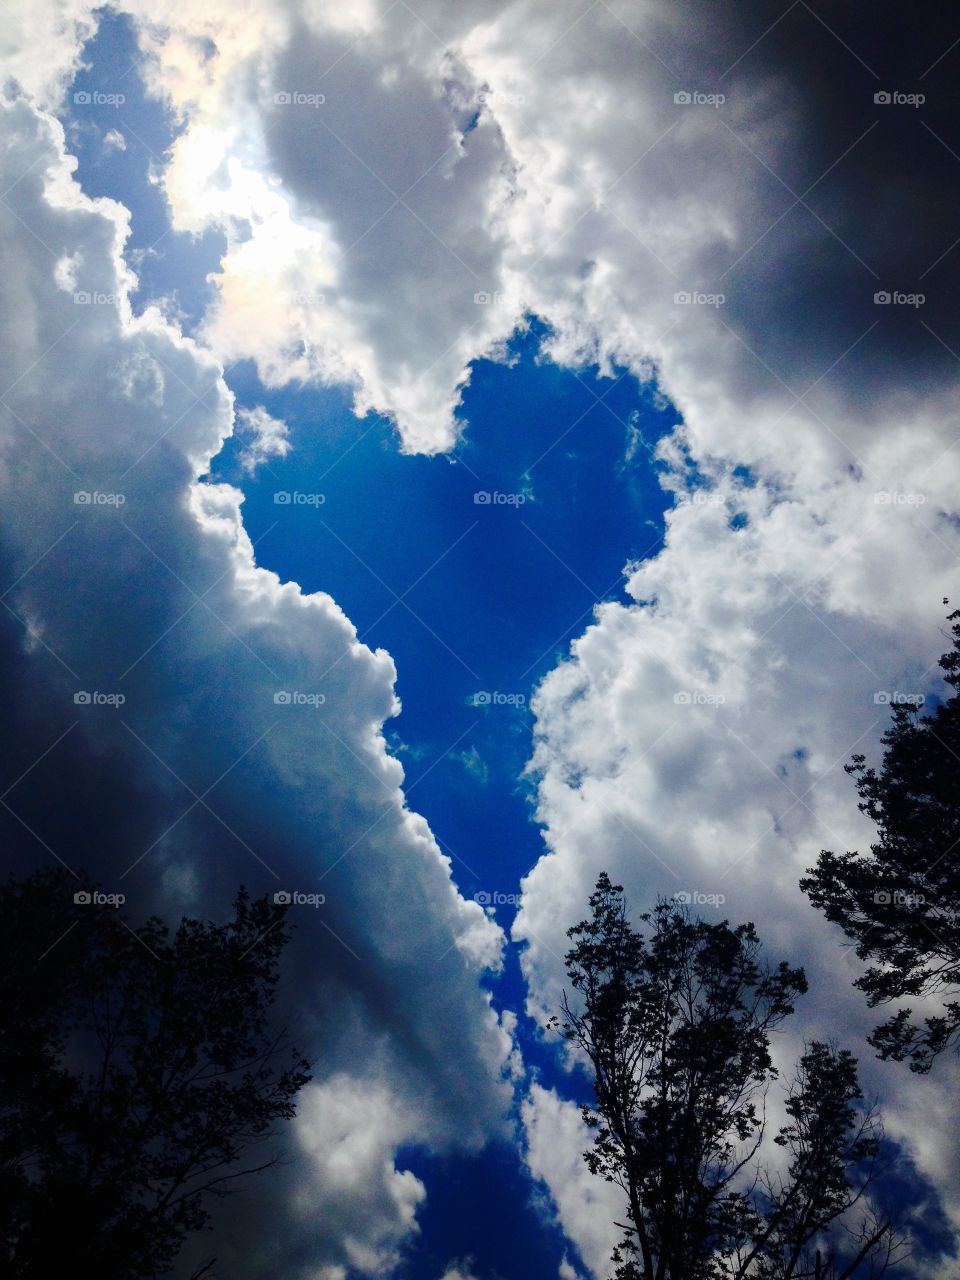 Heart. Heart of Clouds. Sitting in the mountains discussing a friends recent loss of her mom. Looked up and there was a heart.